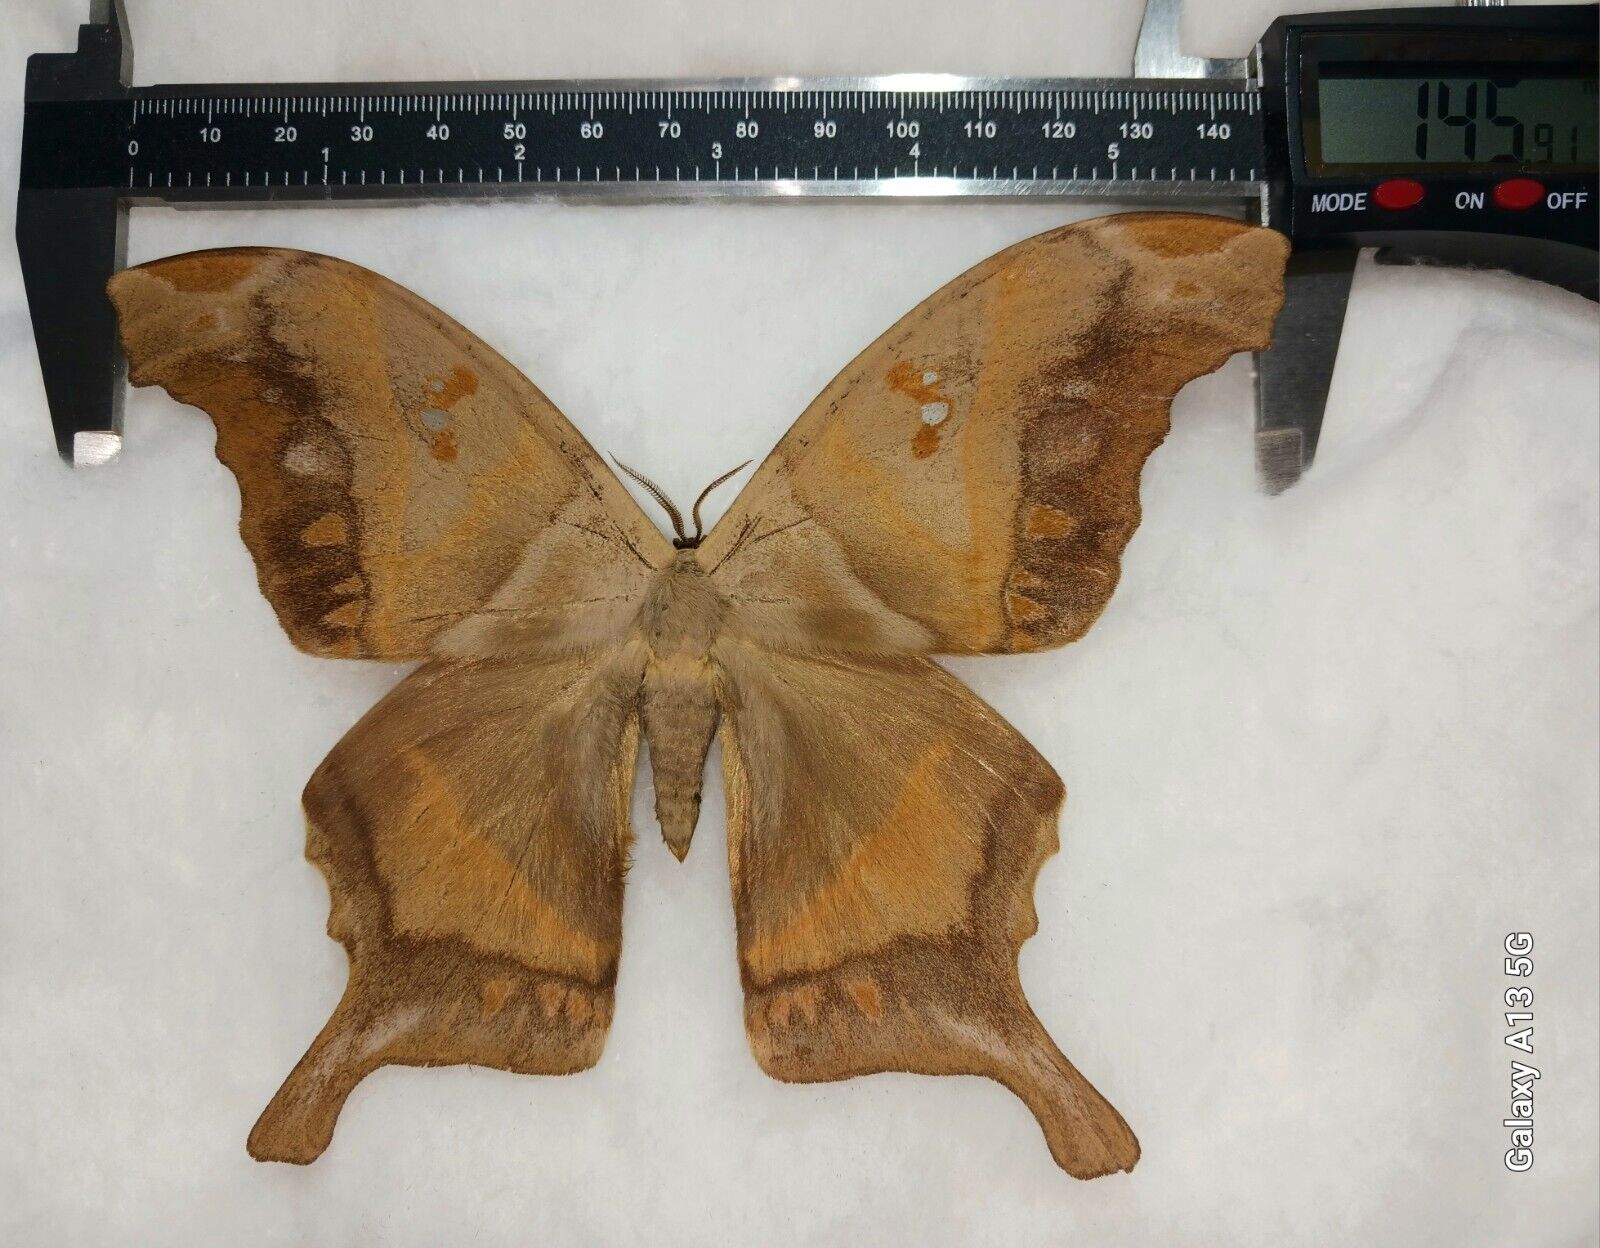 HUGE SATURNIIDAE RARE SP. BUTTERFLY MOTH MOUNTED RIKER FRAMED FROM PERU 145mm